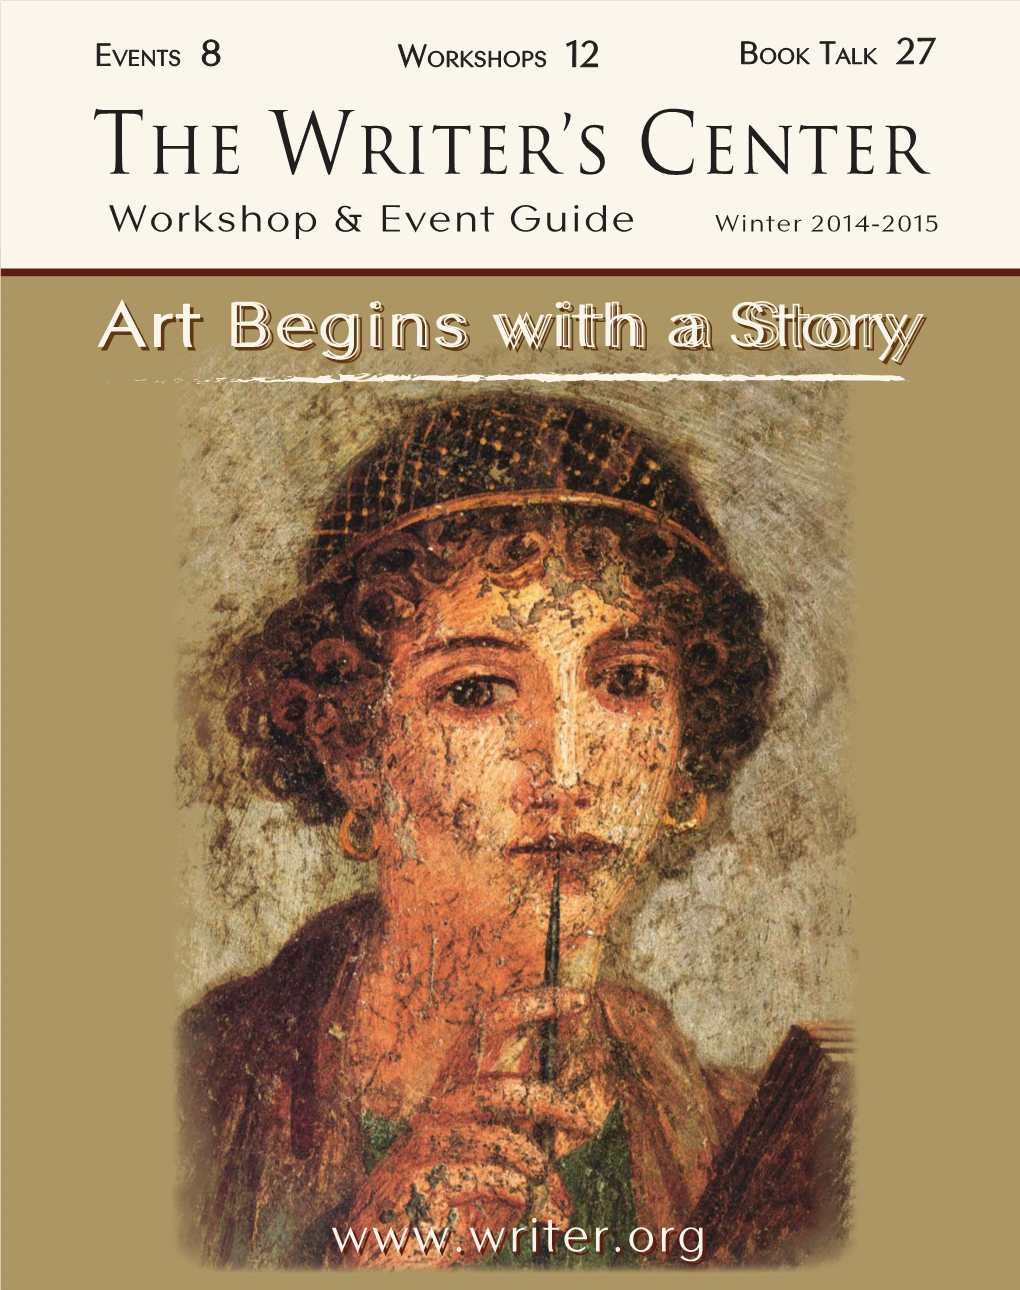 Art Begins with a Story.” Her Own Story of Creativity in the Midst of Exile Is, by Itself, Inspiring